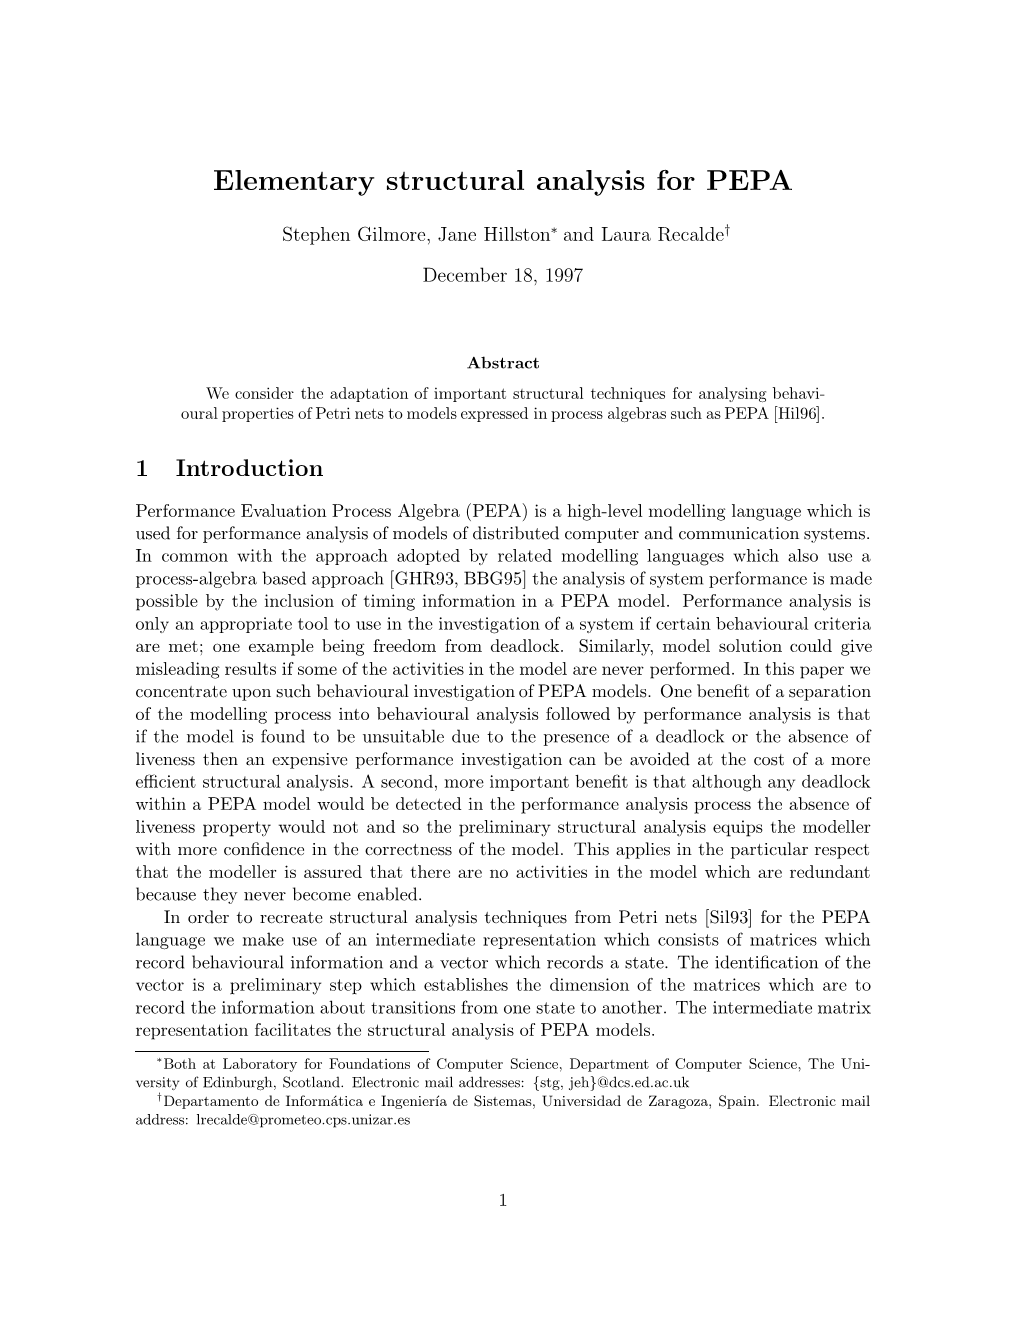 Elementary Structural Analysis for PEPA